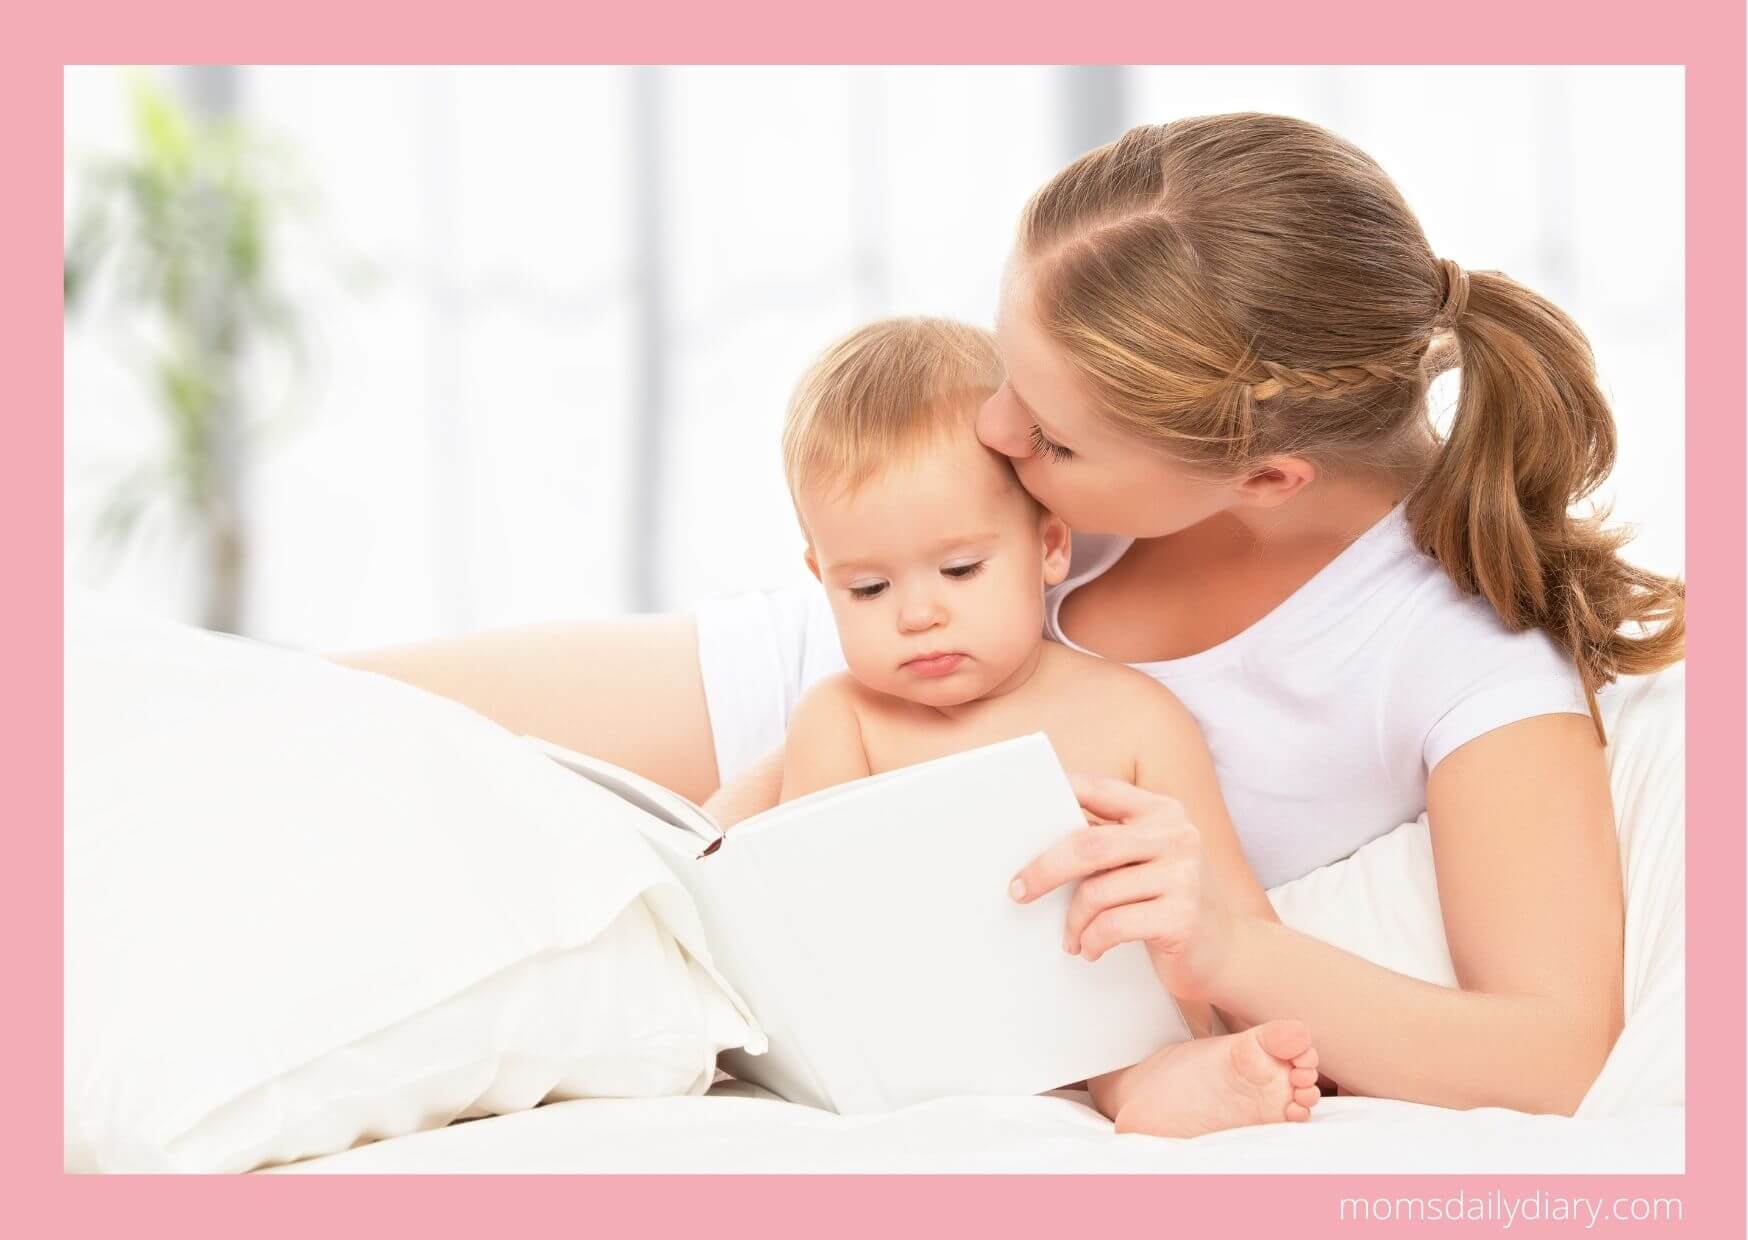 Image of a mom and baby reading a book